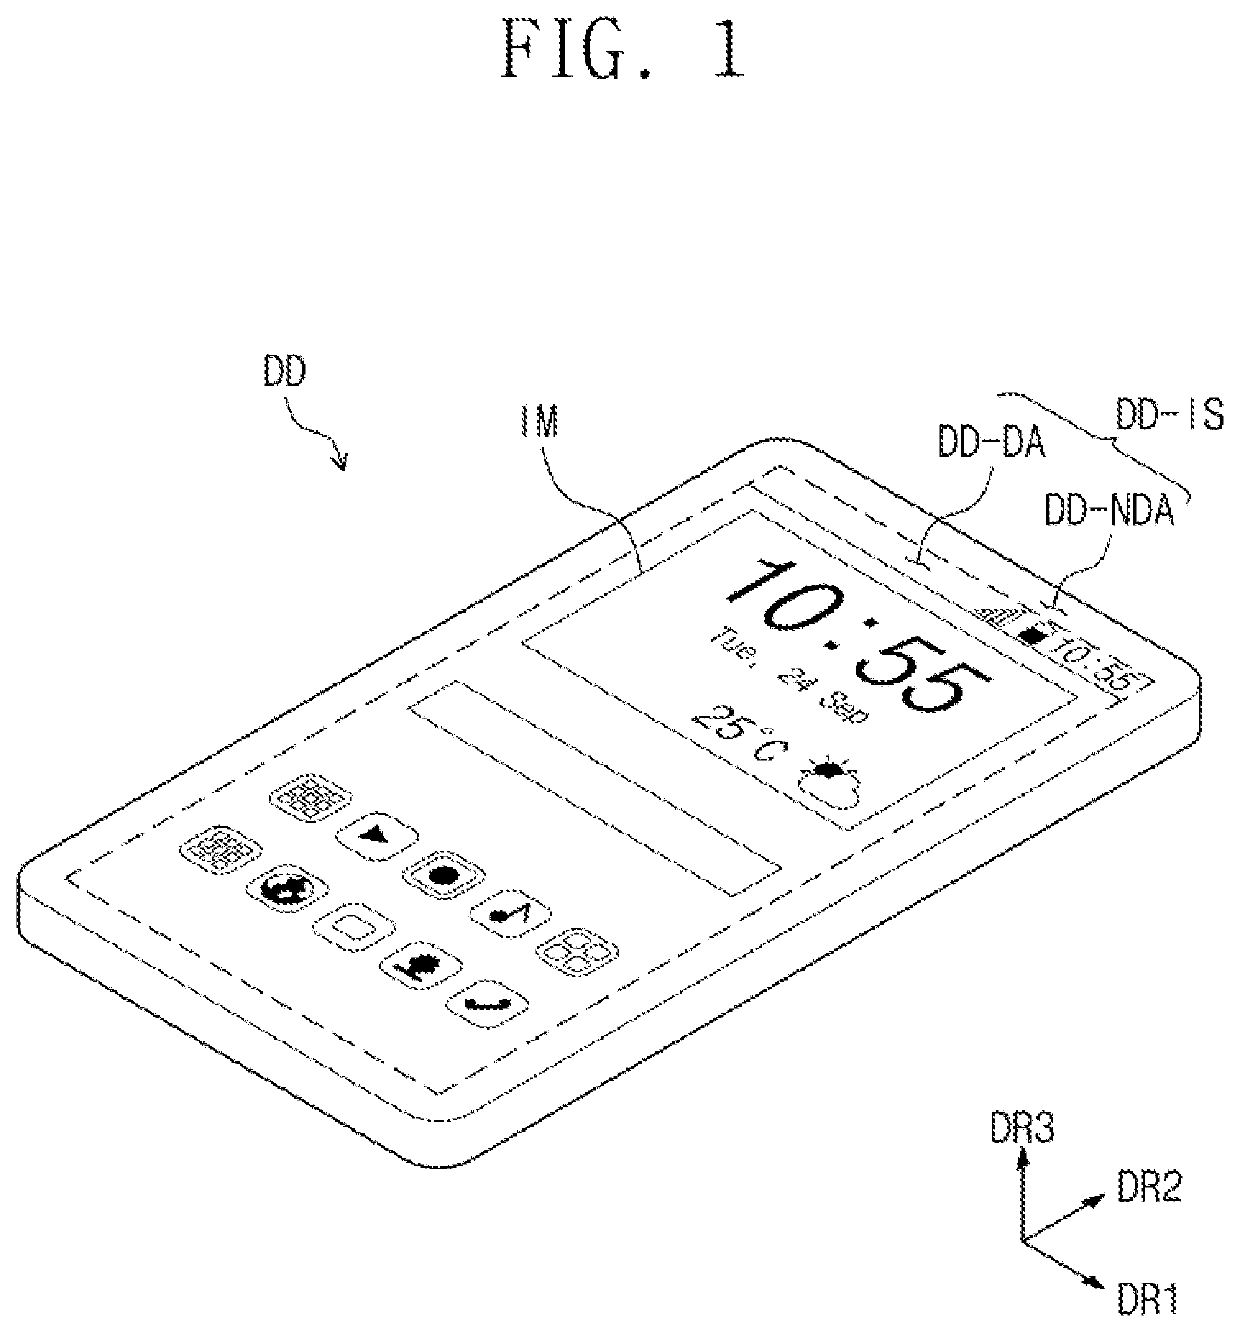 Display device and portable device having the same